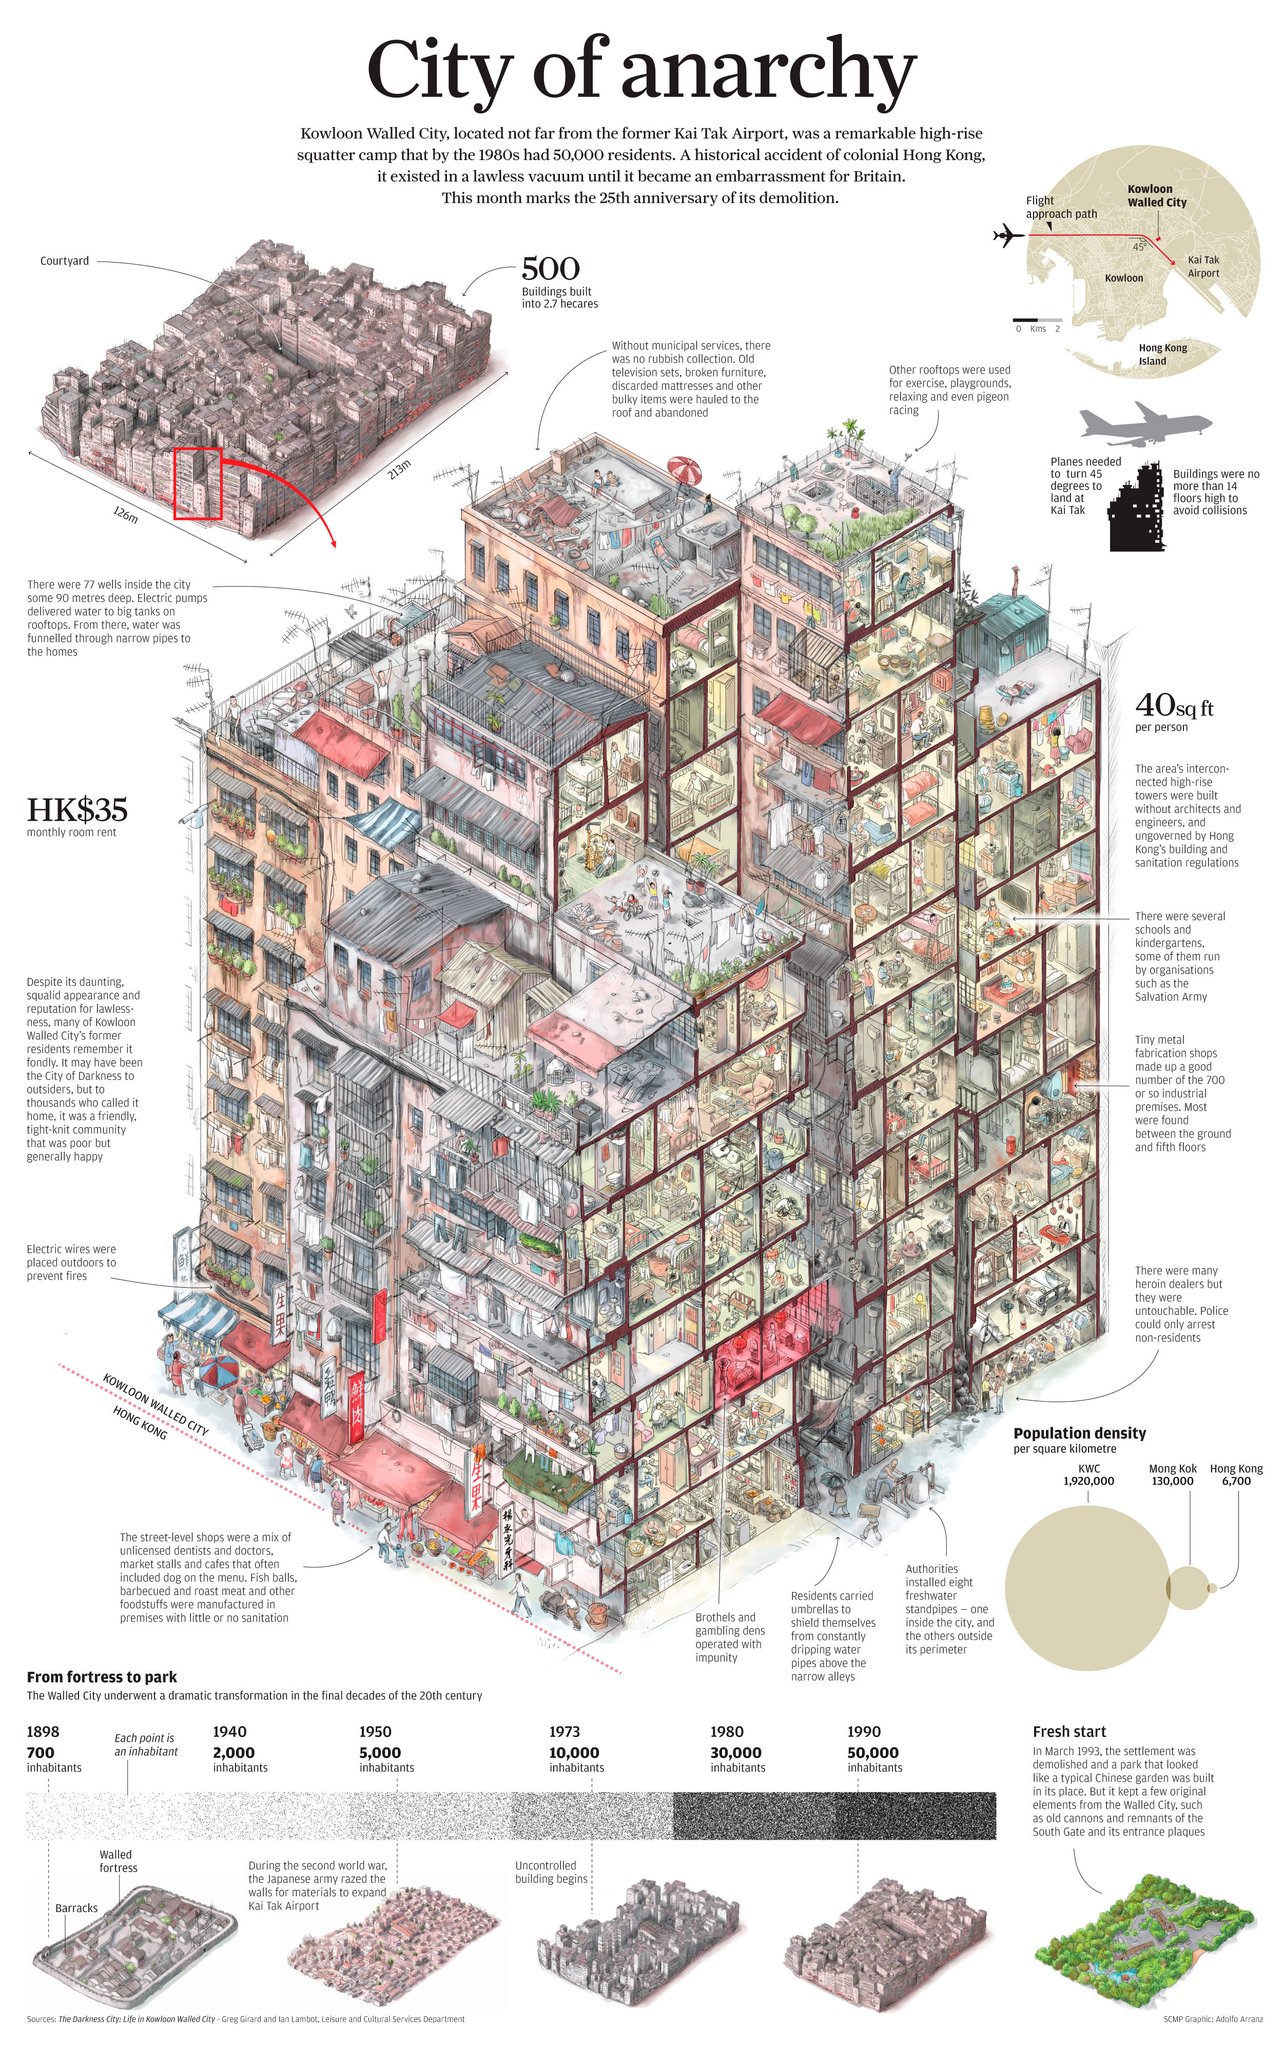 Today marks ten years since this infographic back page about the Kowloon Walled City was published by South China Morning Post. I explained in a few l